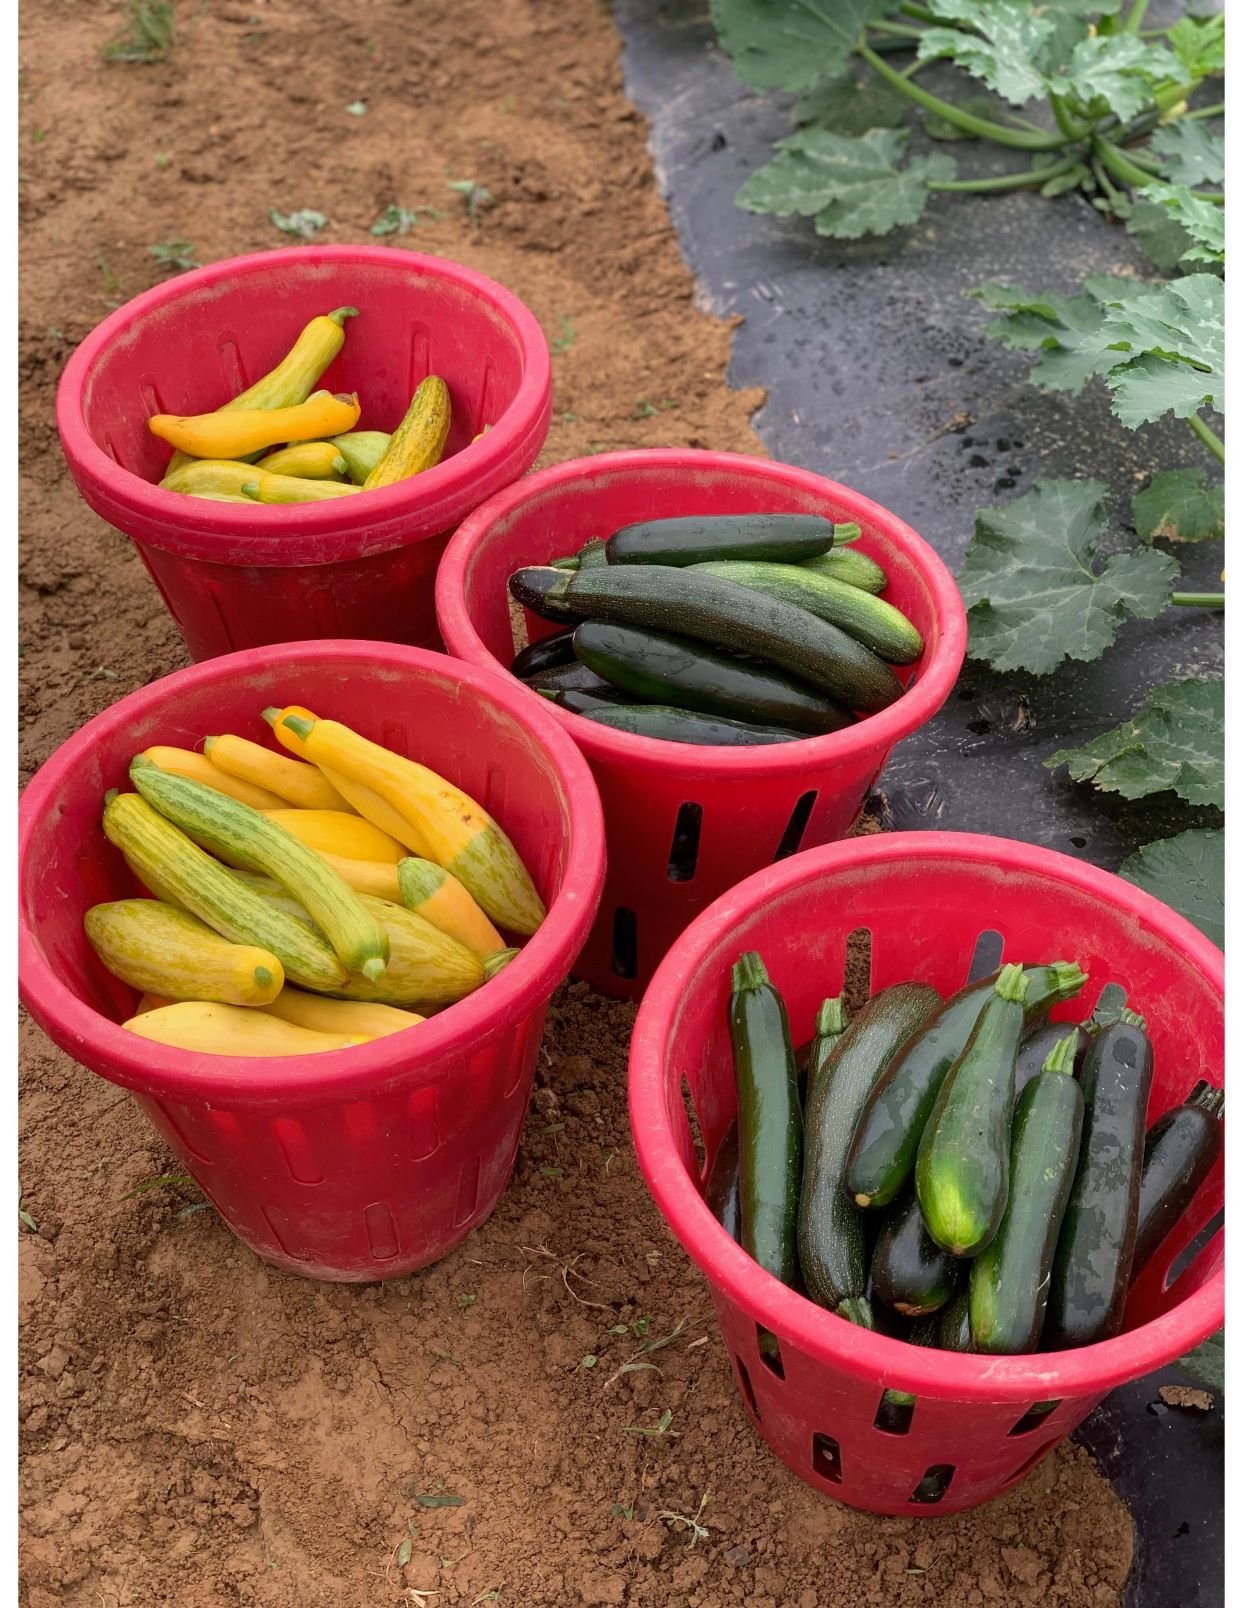 Tuesday CSA: Dickinson College Farm Field Notes for Week of June 24th